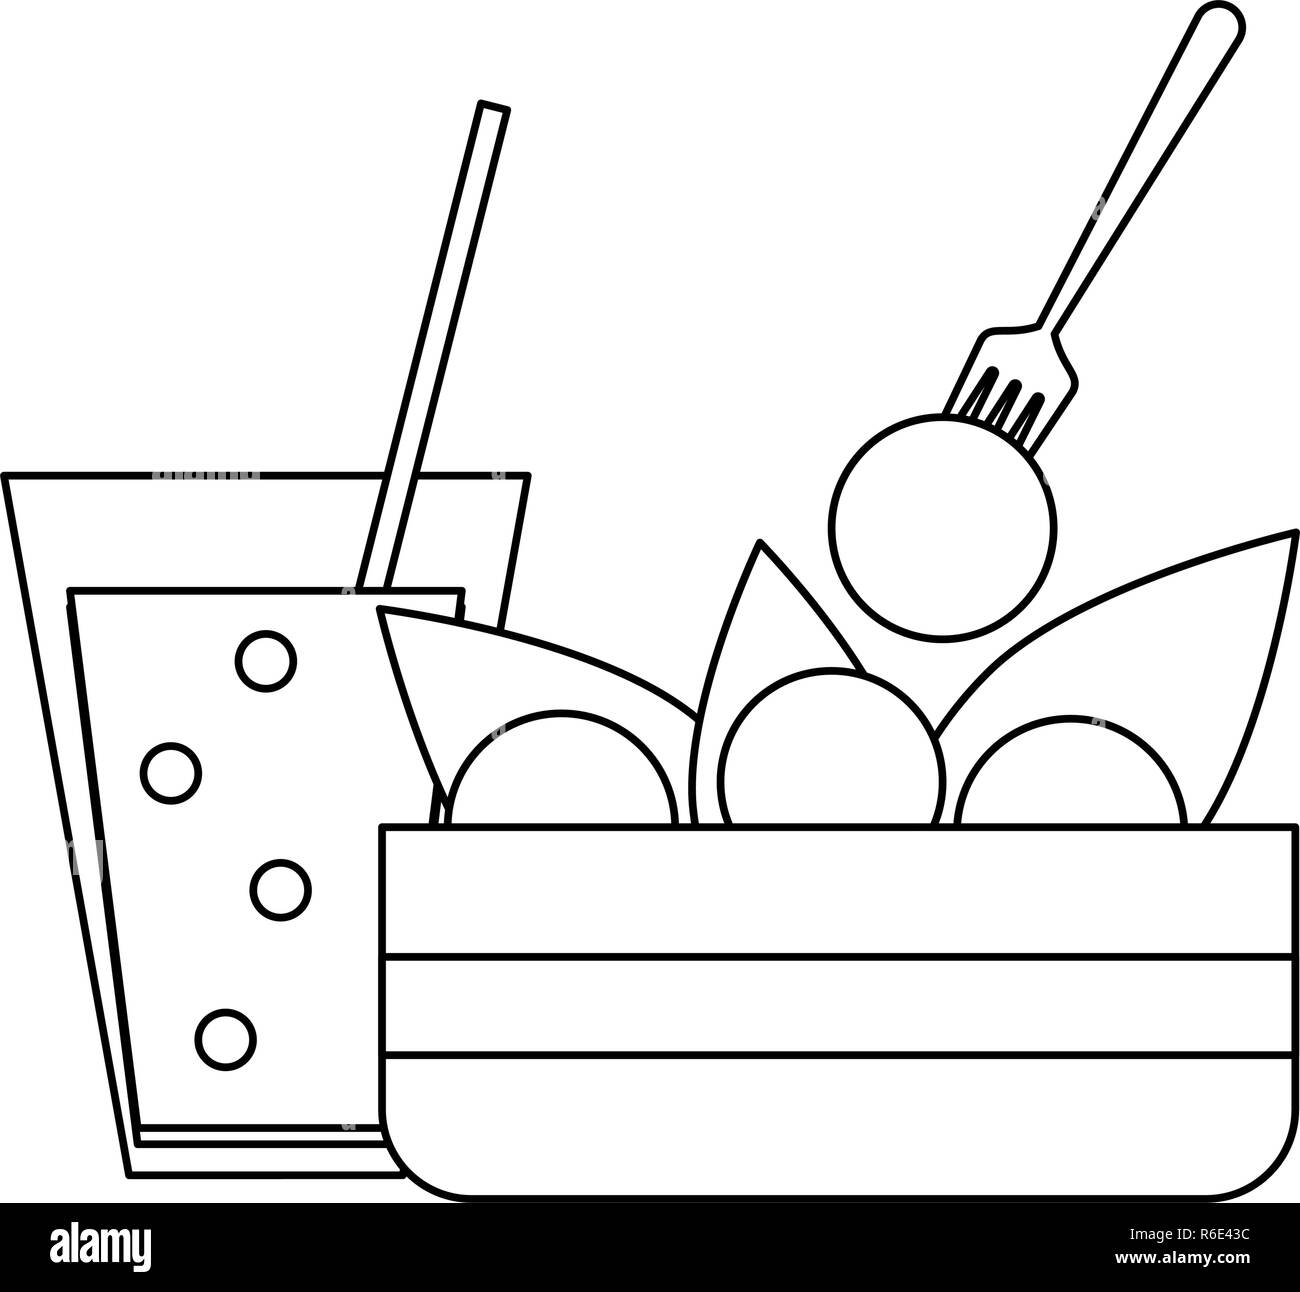 Delicious food concept black and white Stock Vector